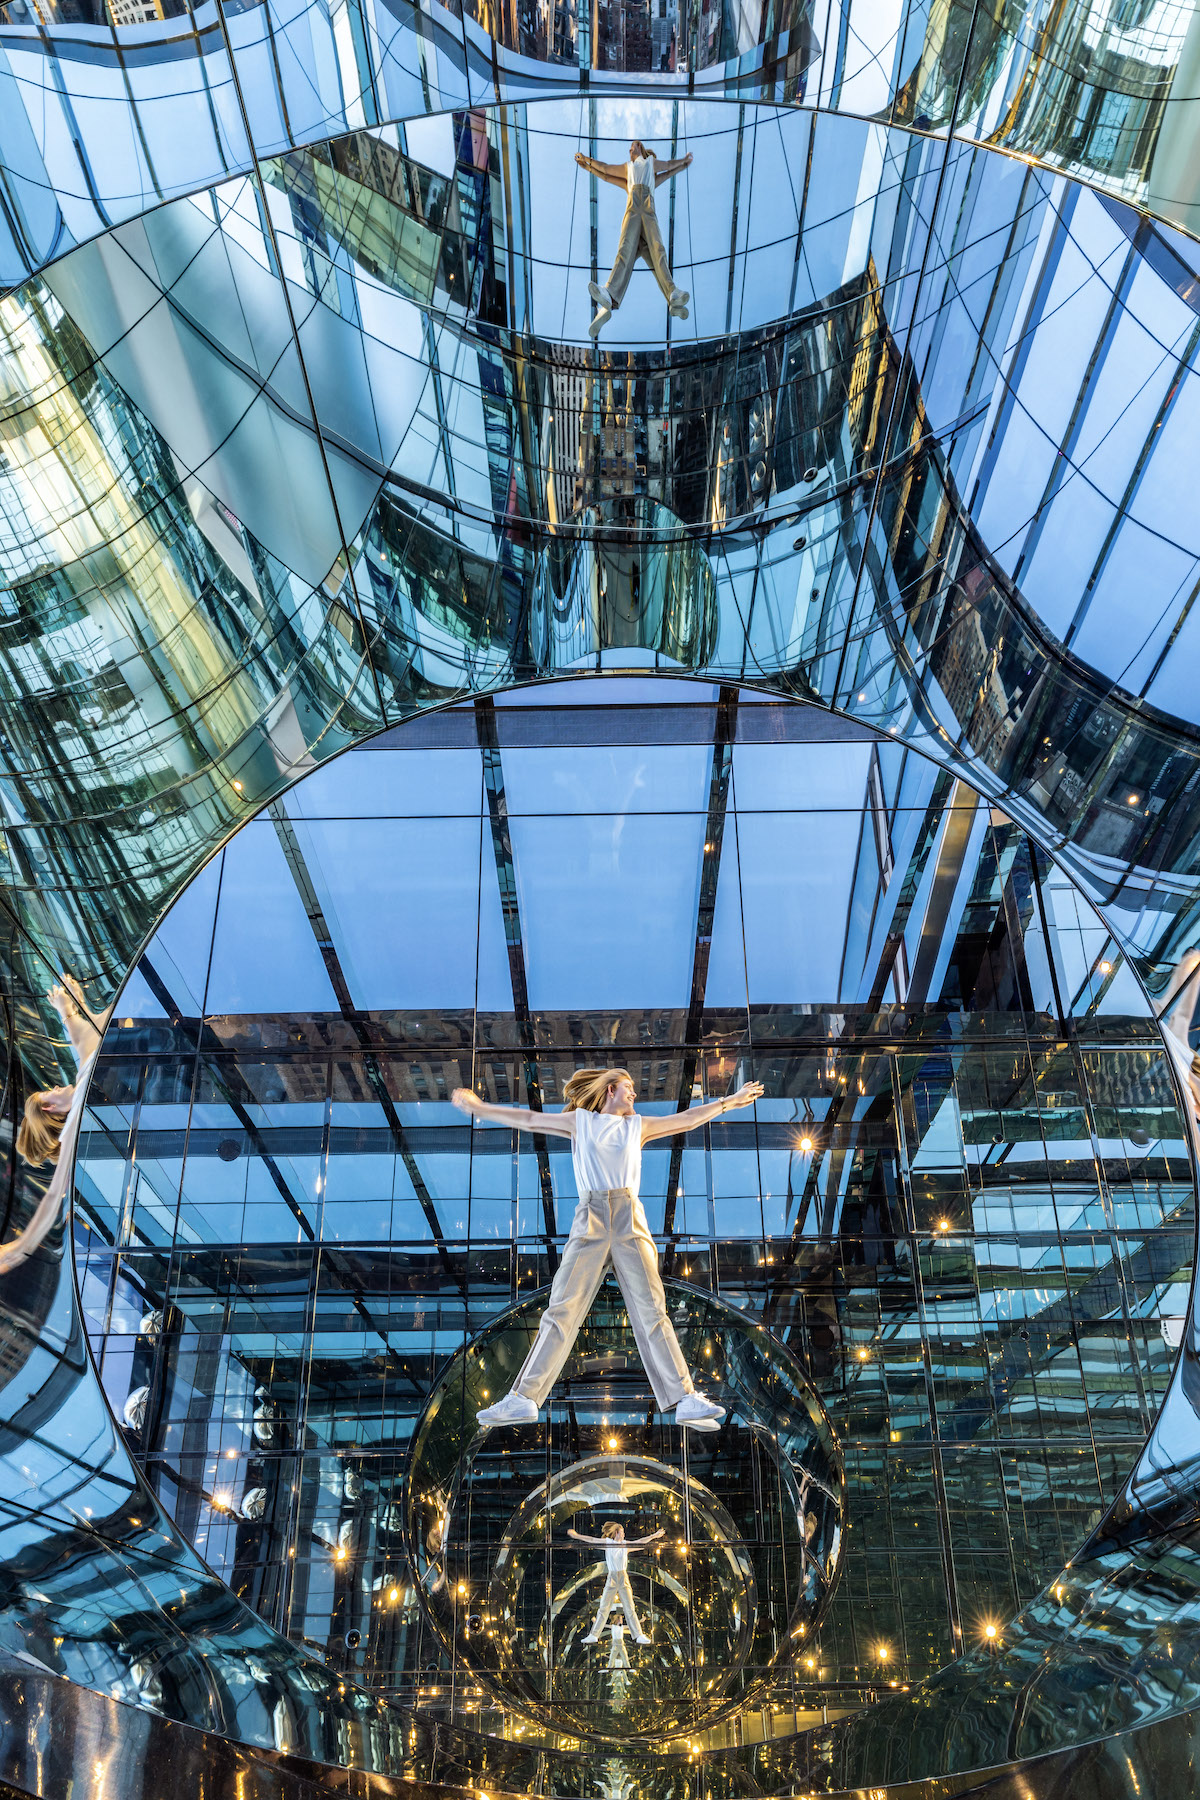 Transcendence Chapter of AIR, Immersive Experience at SUMMIT One Vanderbilt